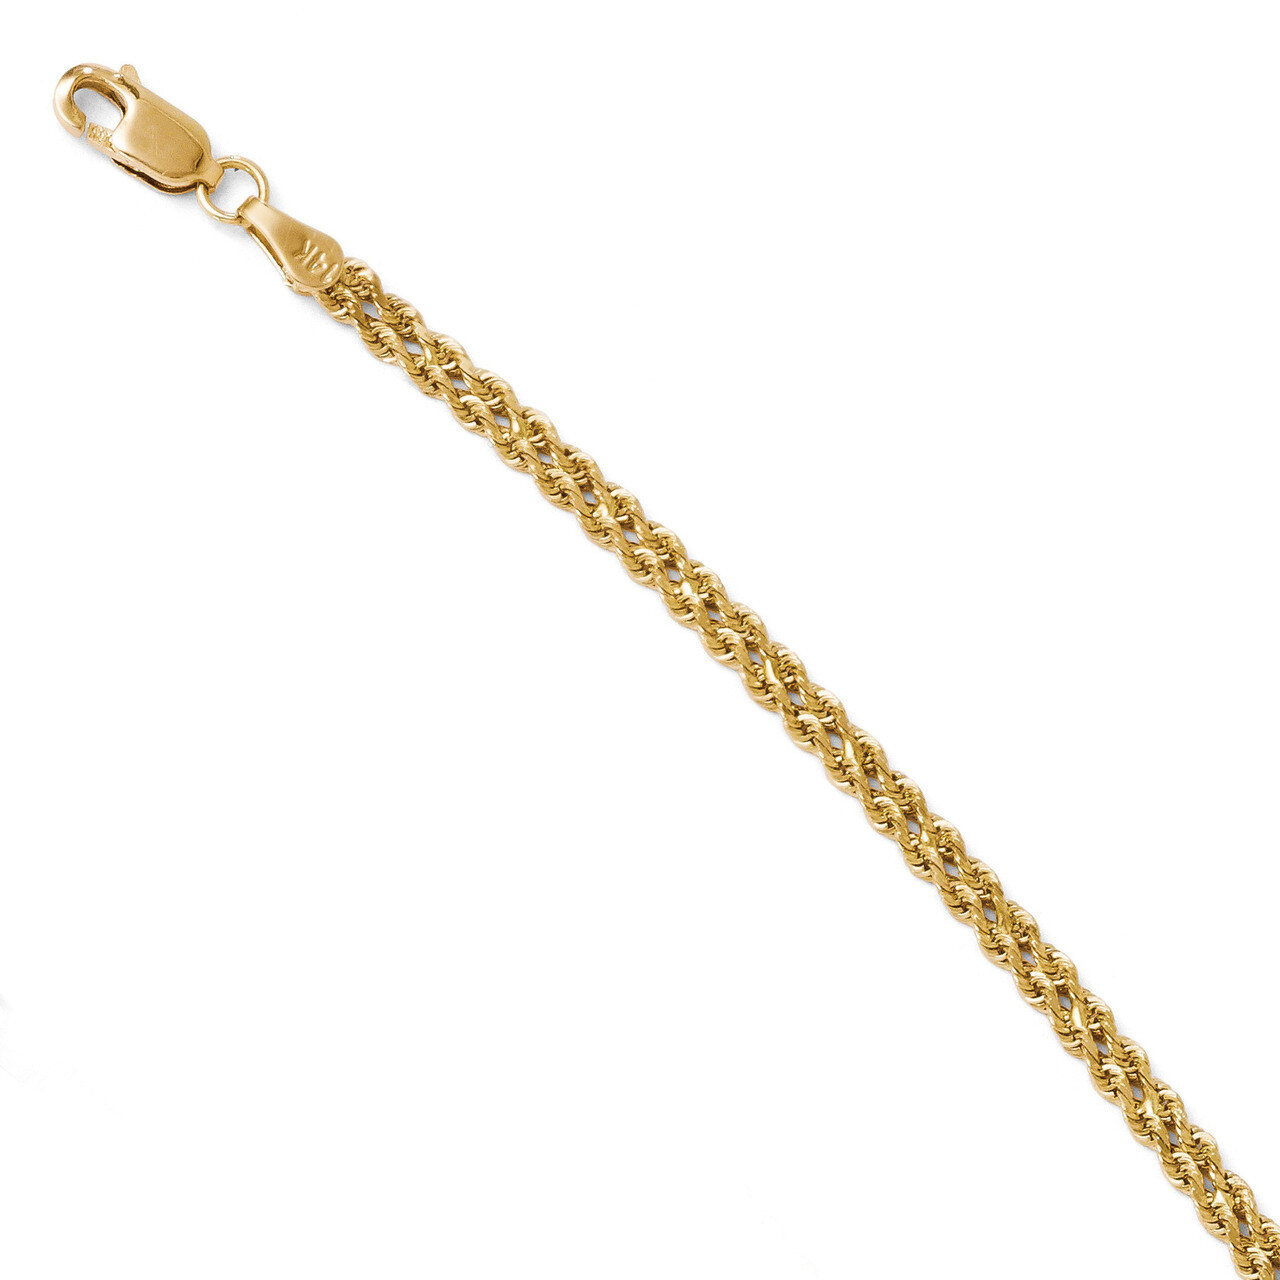 3.0mm Wide Diamond Cut Double Rope Chain 7 Inch - 14k Gold HB-507-7